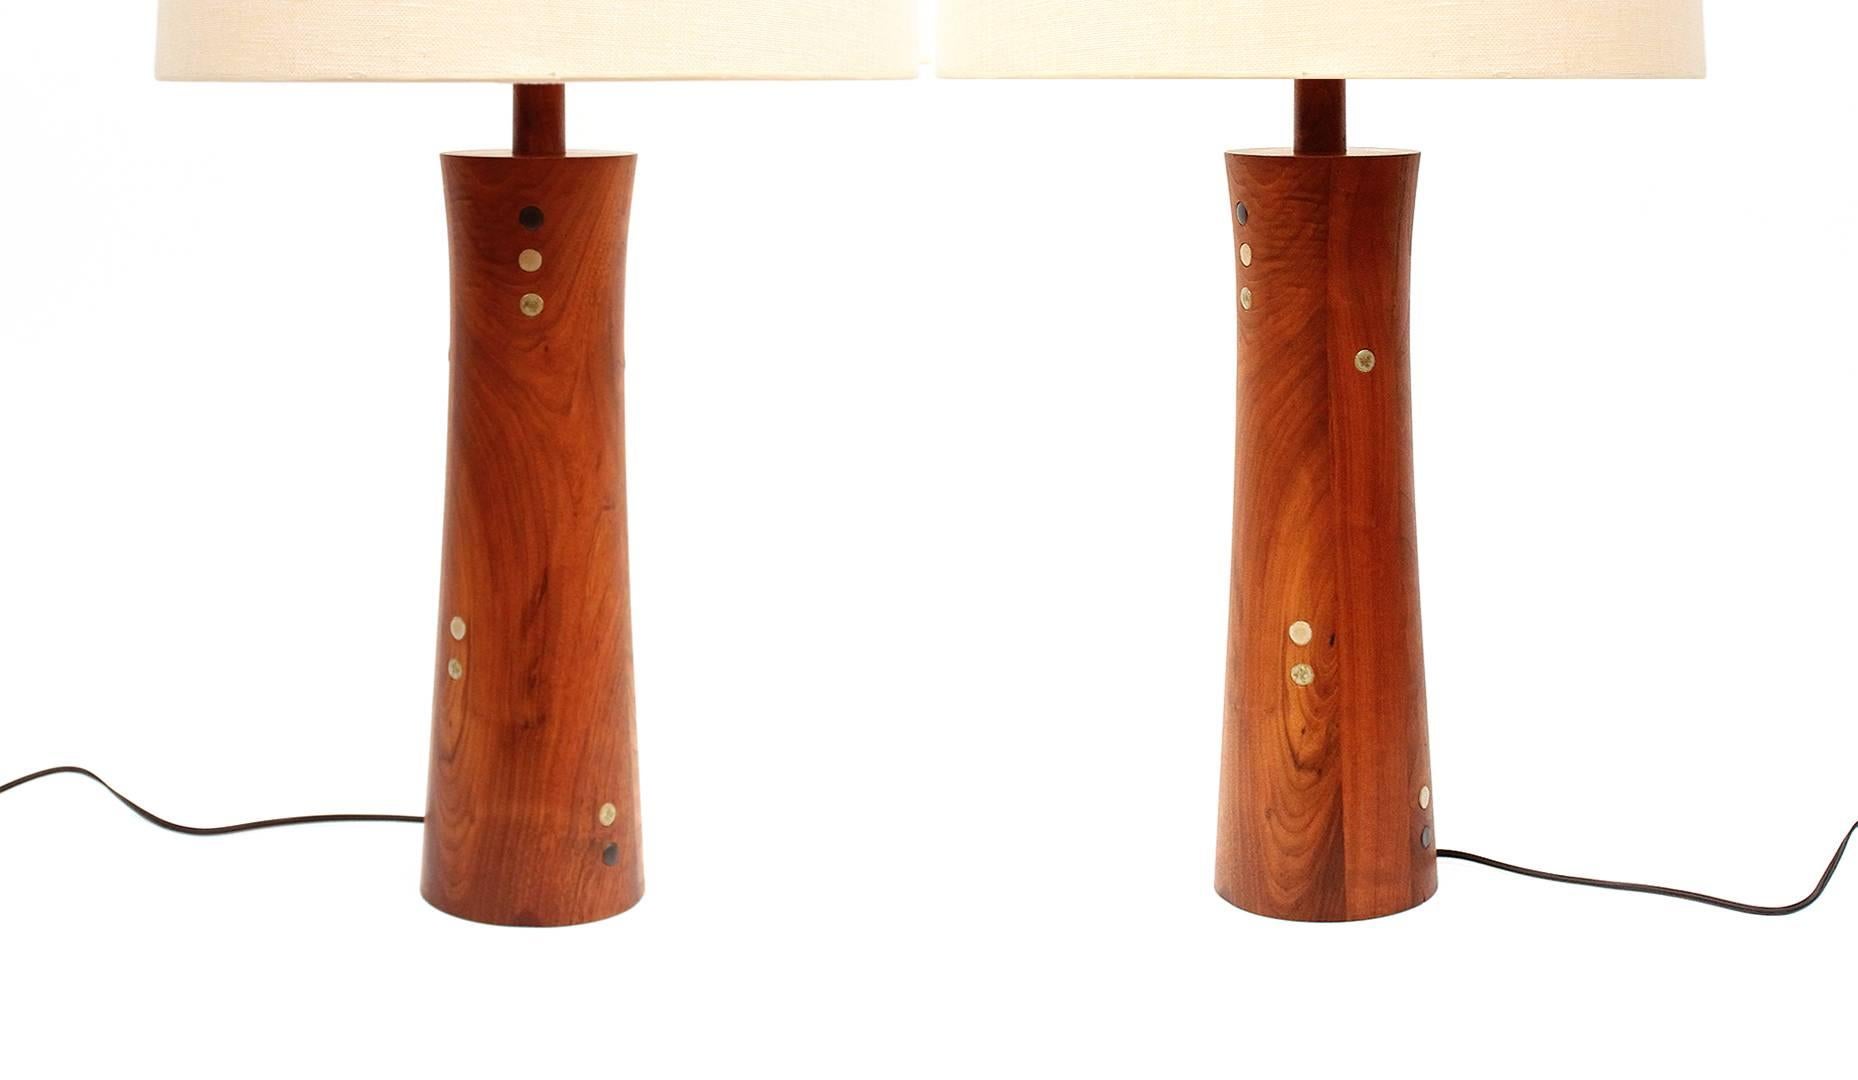 Exquisite pair of table lamps in walnut with inset circular ceramic tiles designed by Jane and Gordon Martz for Marshall Studios.  Rare pair of mixed material lamps from this husband and wife design duo. Lamps include the Martzes iconic wooden